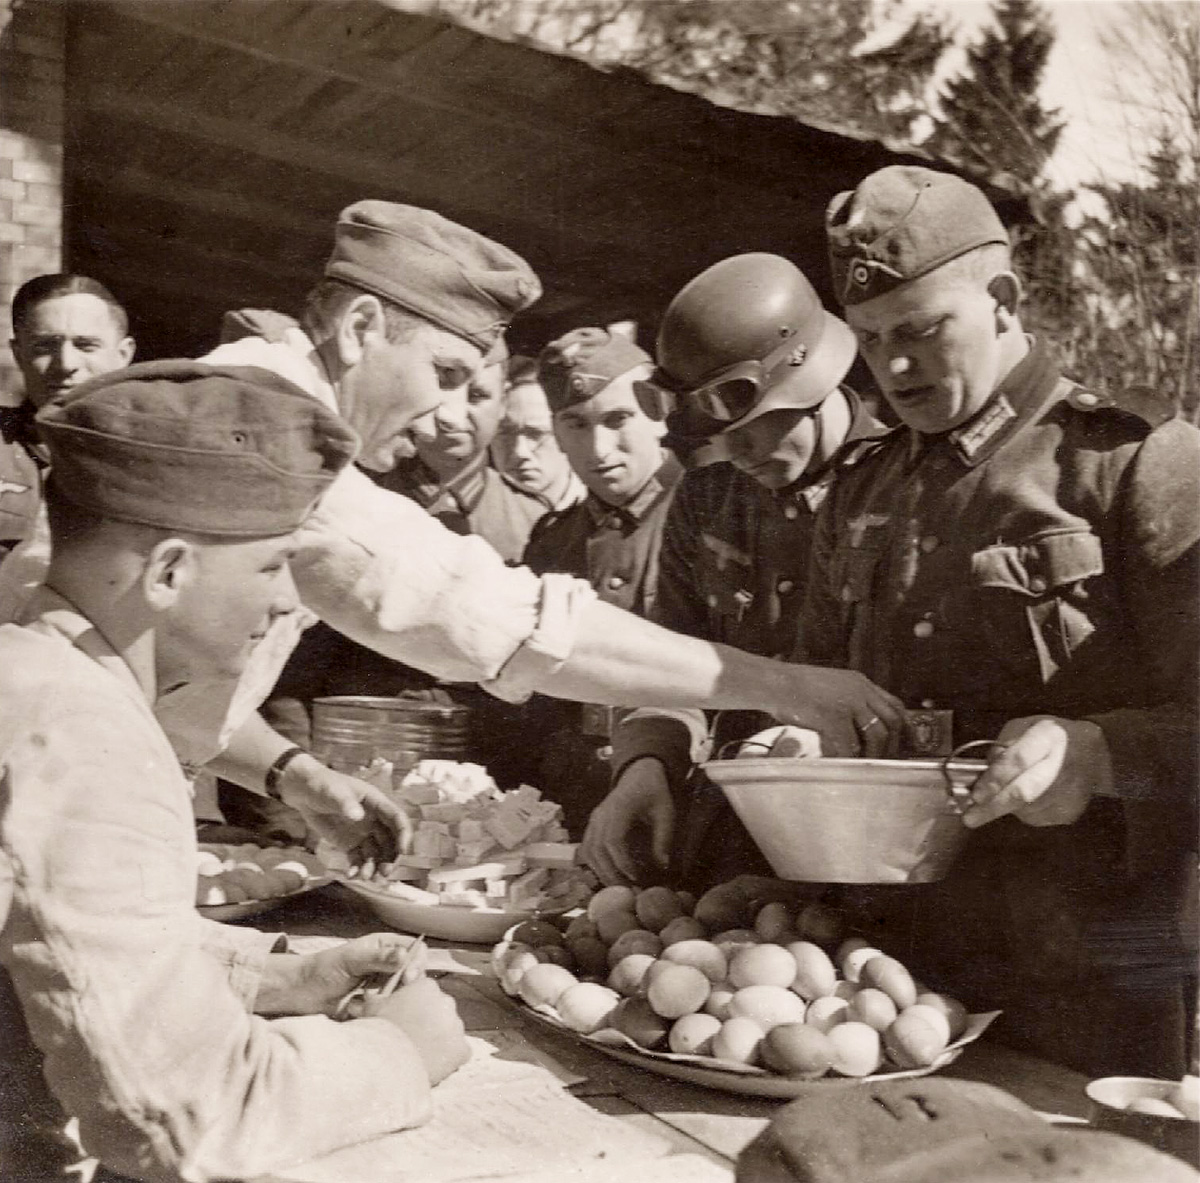 German soldiers in a chow line, only 3 eggs per man. All the cheese you want. View full size.